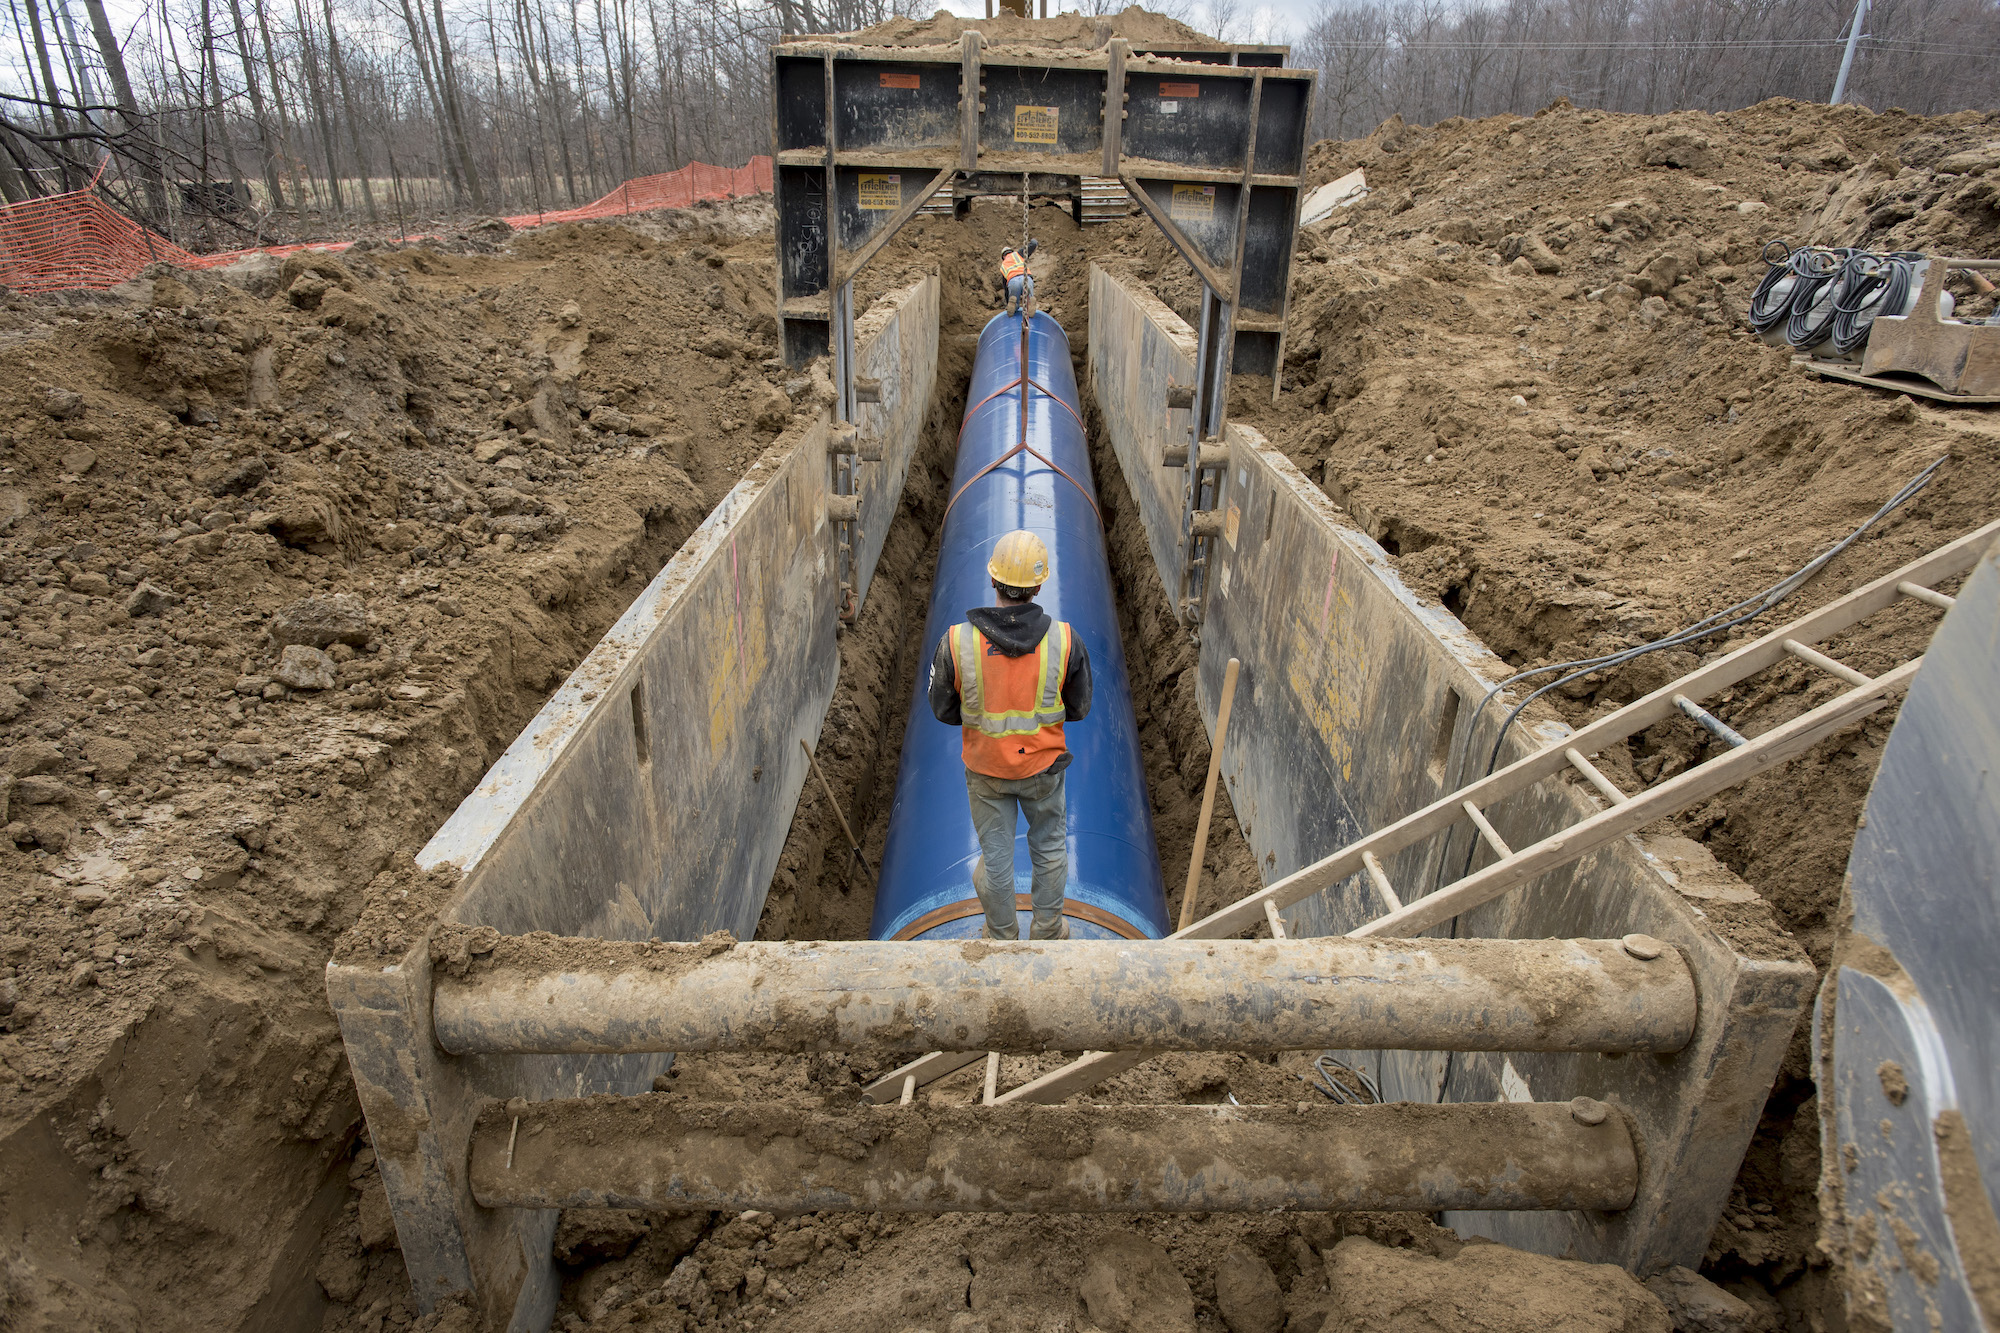 Workers on a section of the Karegnondi Water Authority pipeline in Michigan © David Guralnick, The Detroit News